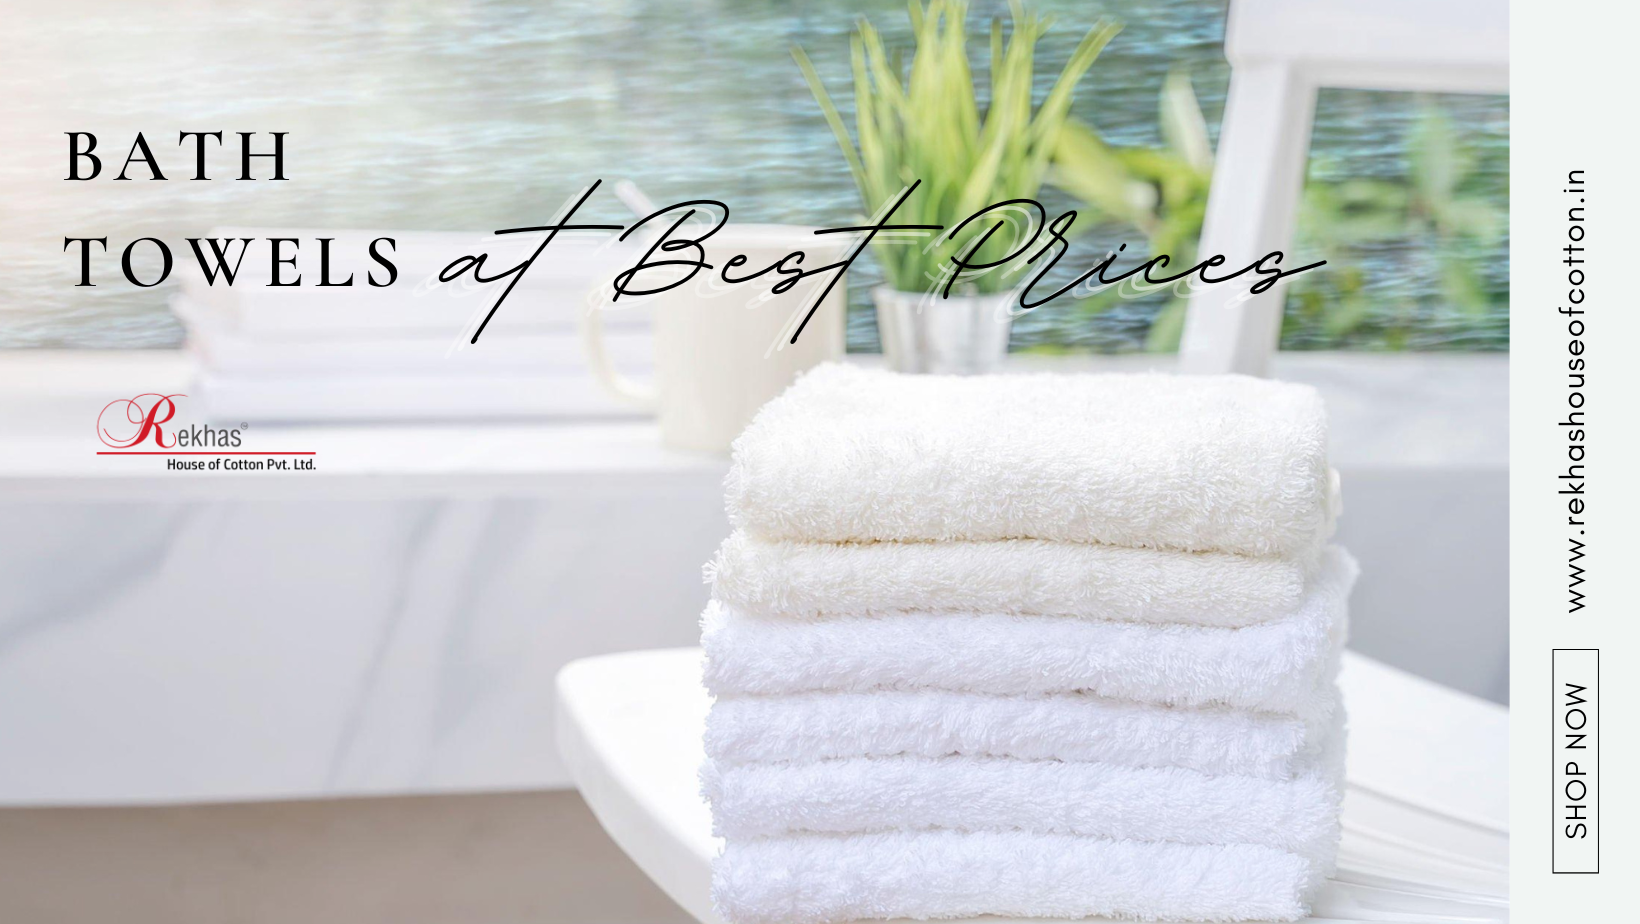 Buy Bath Towels in Goa at Cheap & Reasonable Rate from Rekhas House of Cotton - Leading Suppliers of Bath Towels & Bath Linen in India